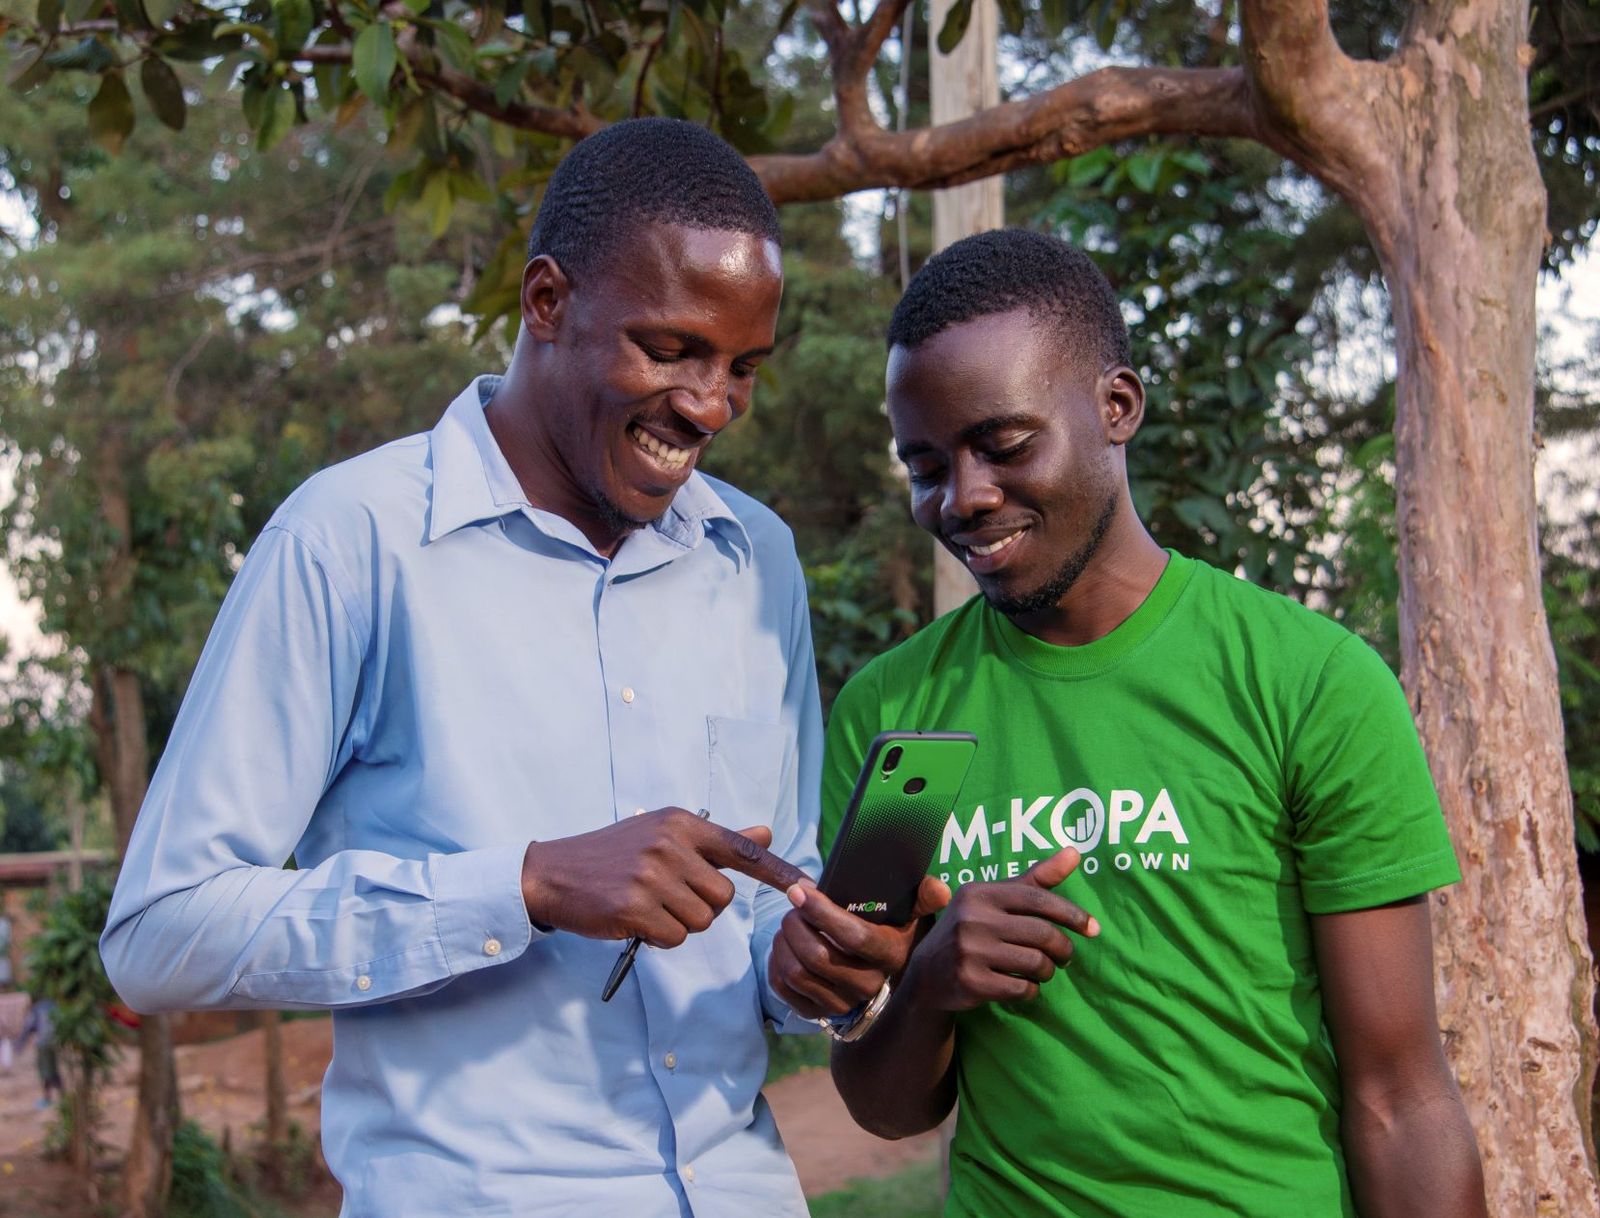 M-KOPA secured a $75 million growth equity funding round